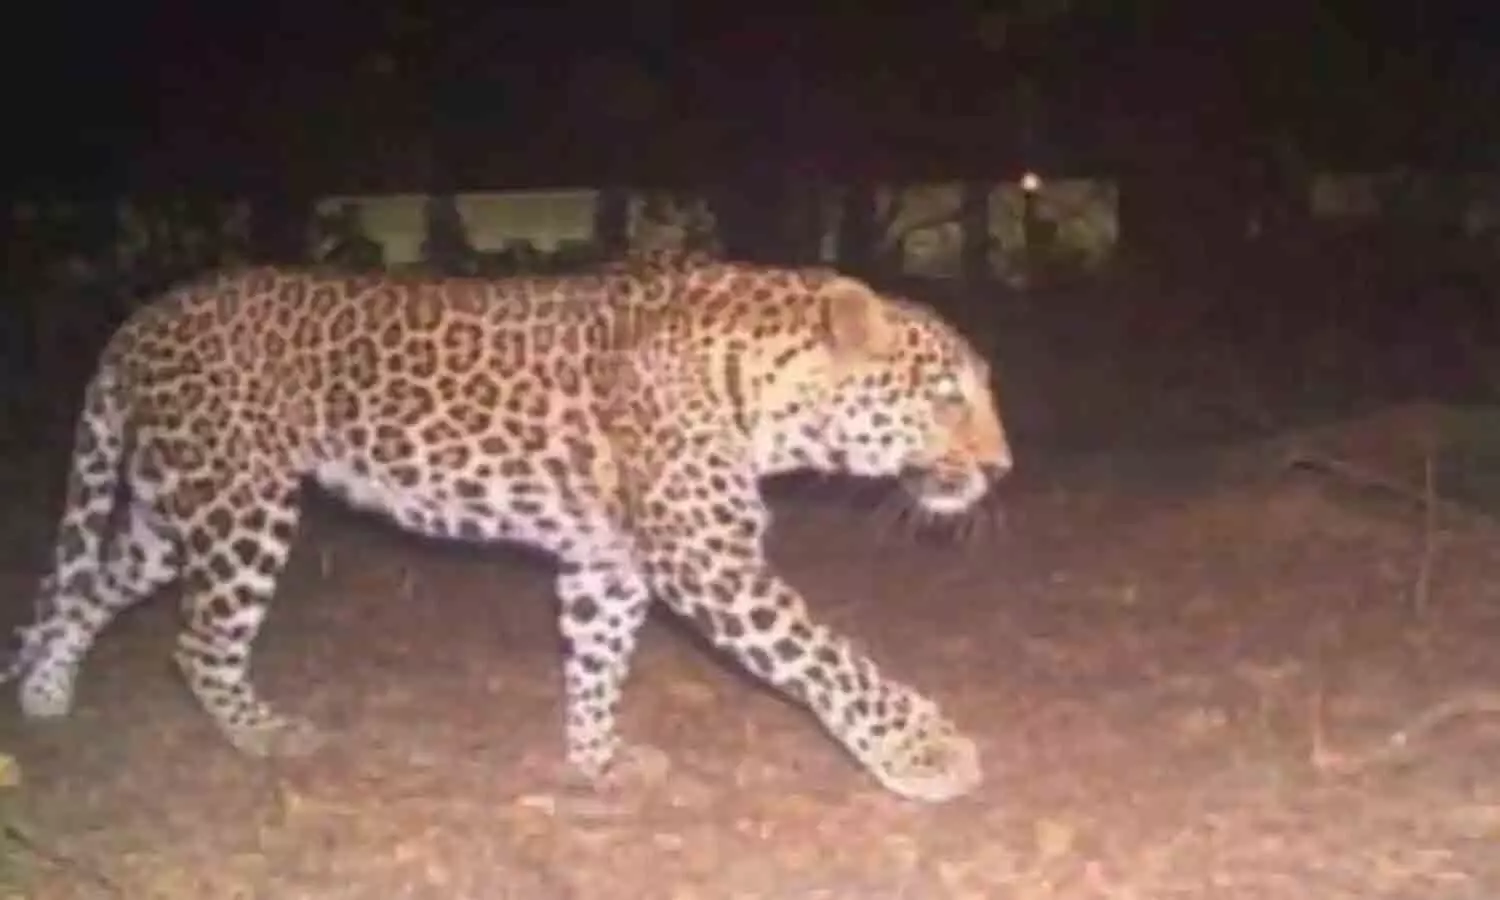 Leopard in Meerut: The leopard was finally caught, this is how the forest department team got success